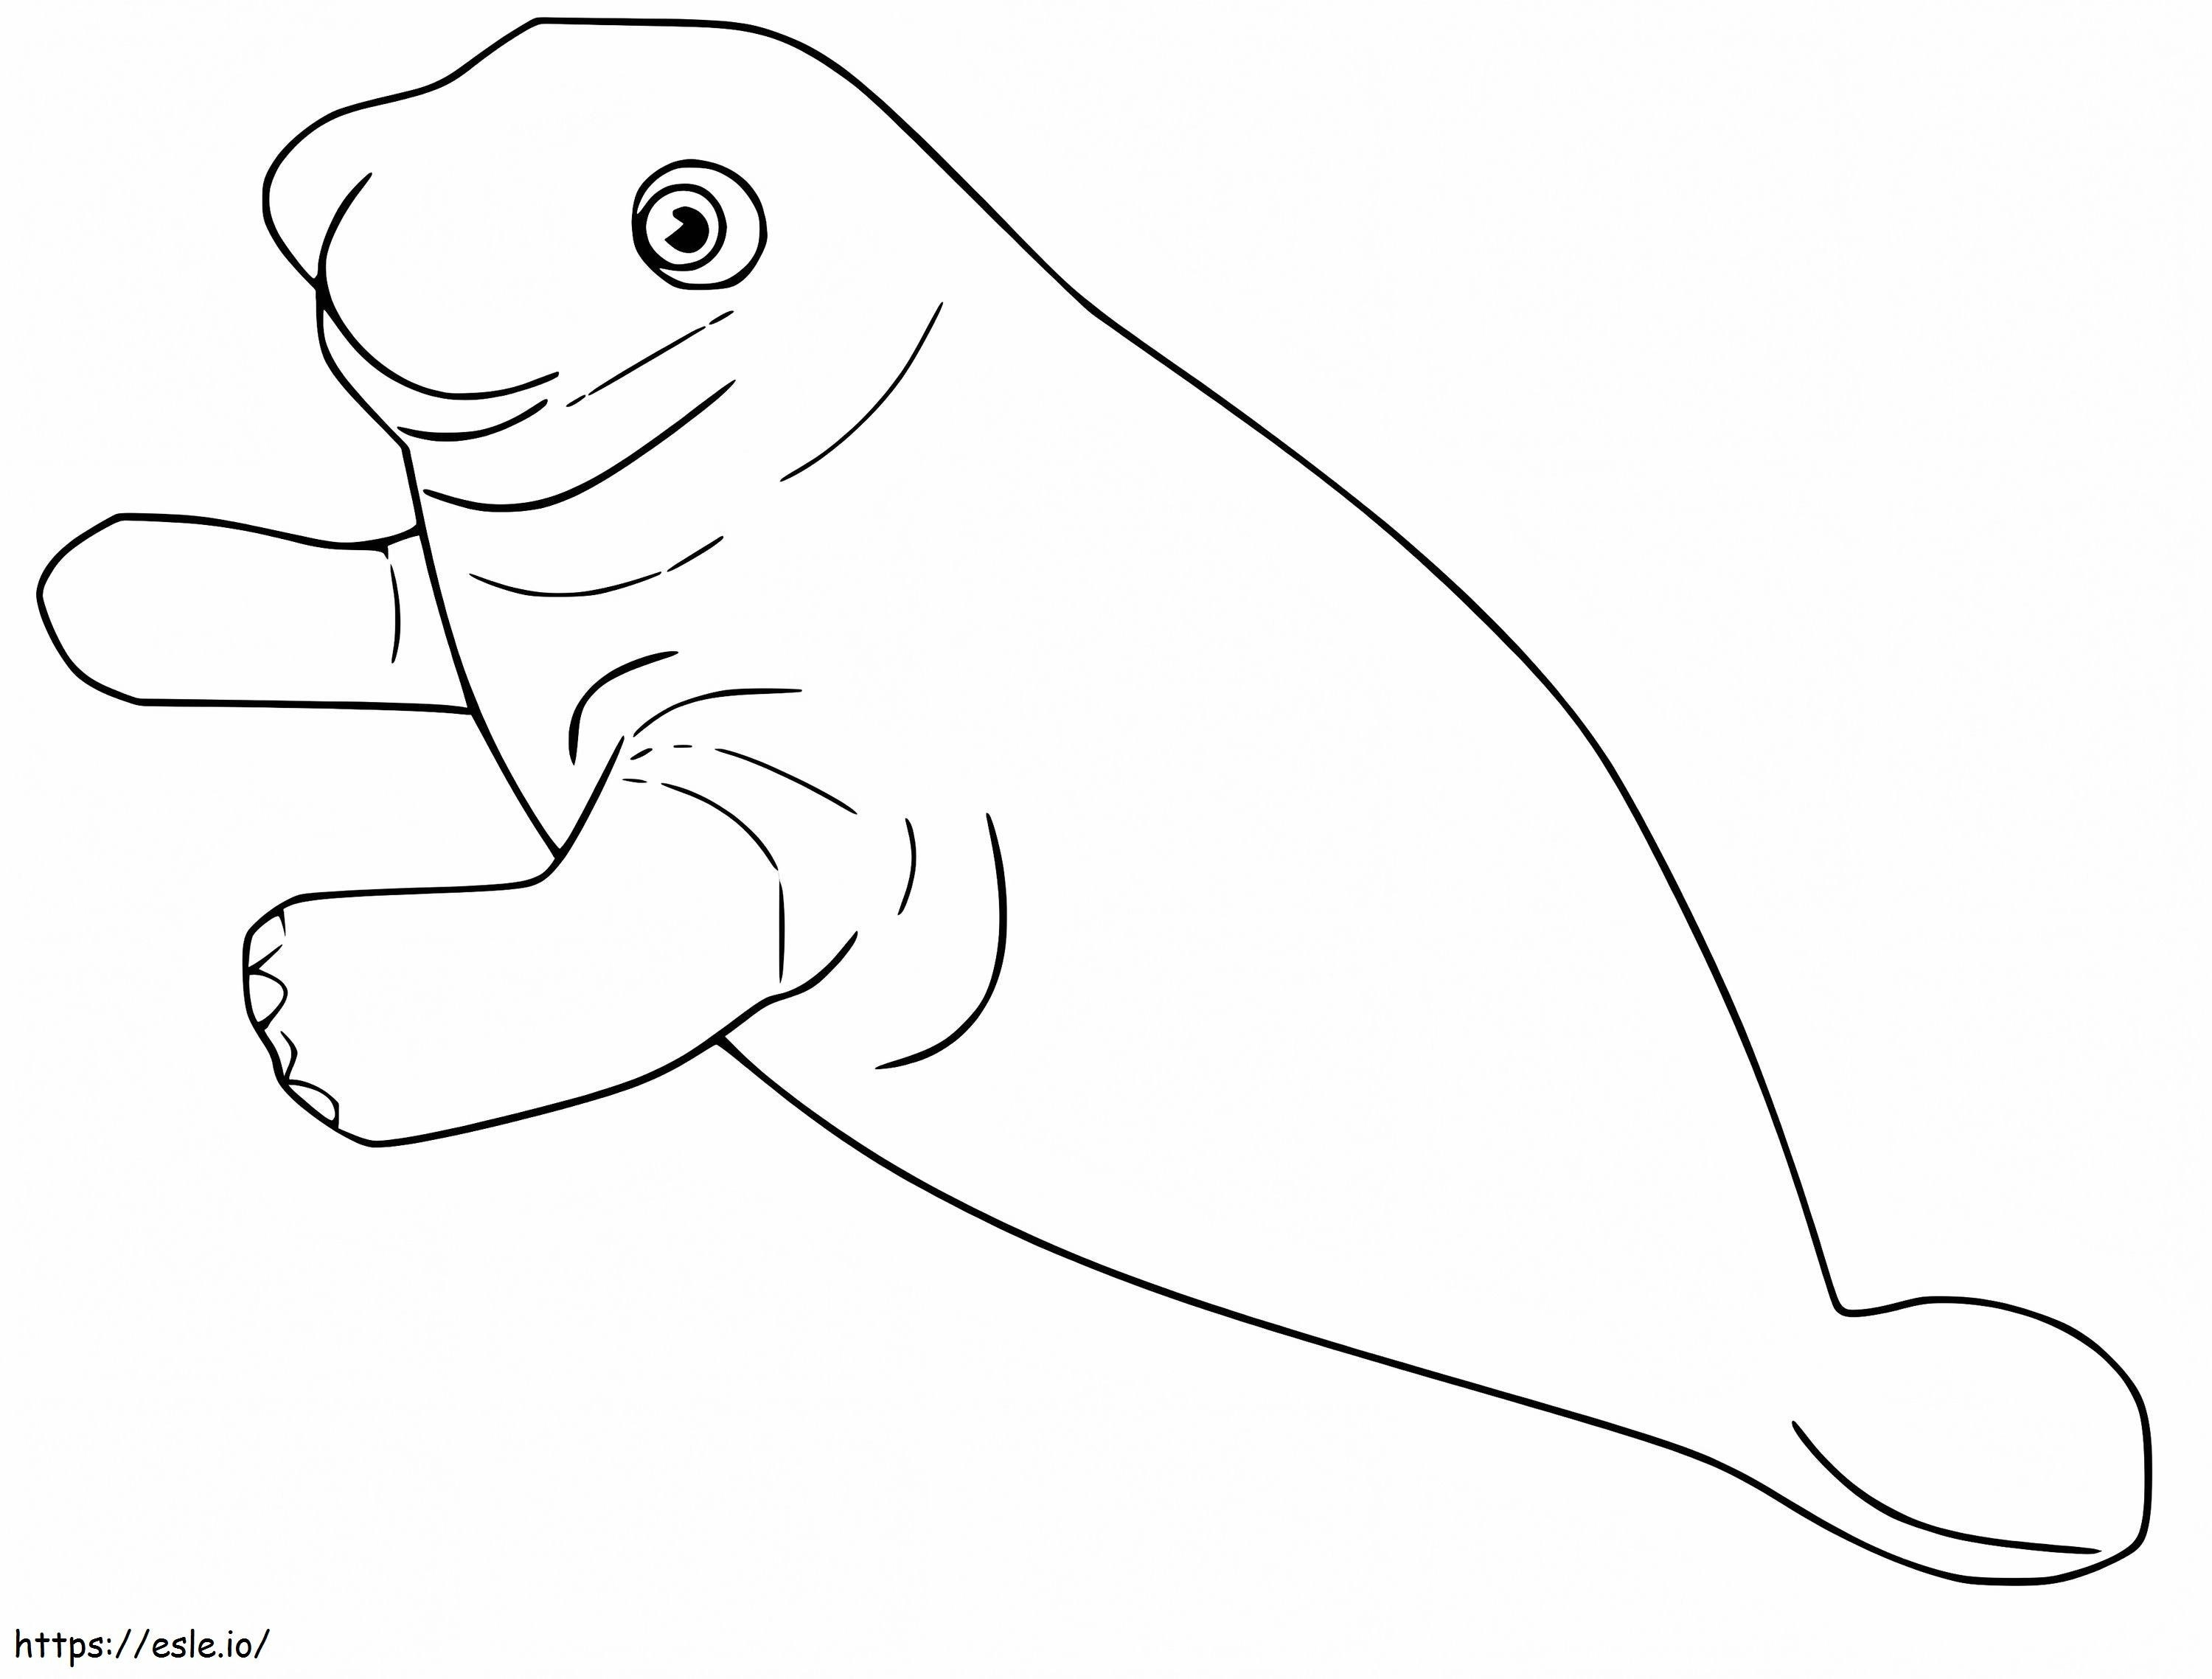 Lovely Manatee coloring page